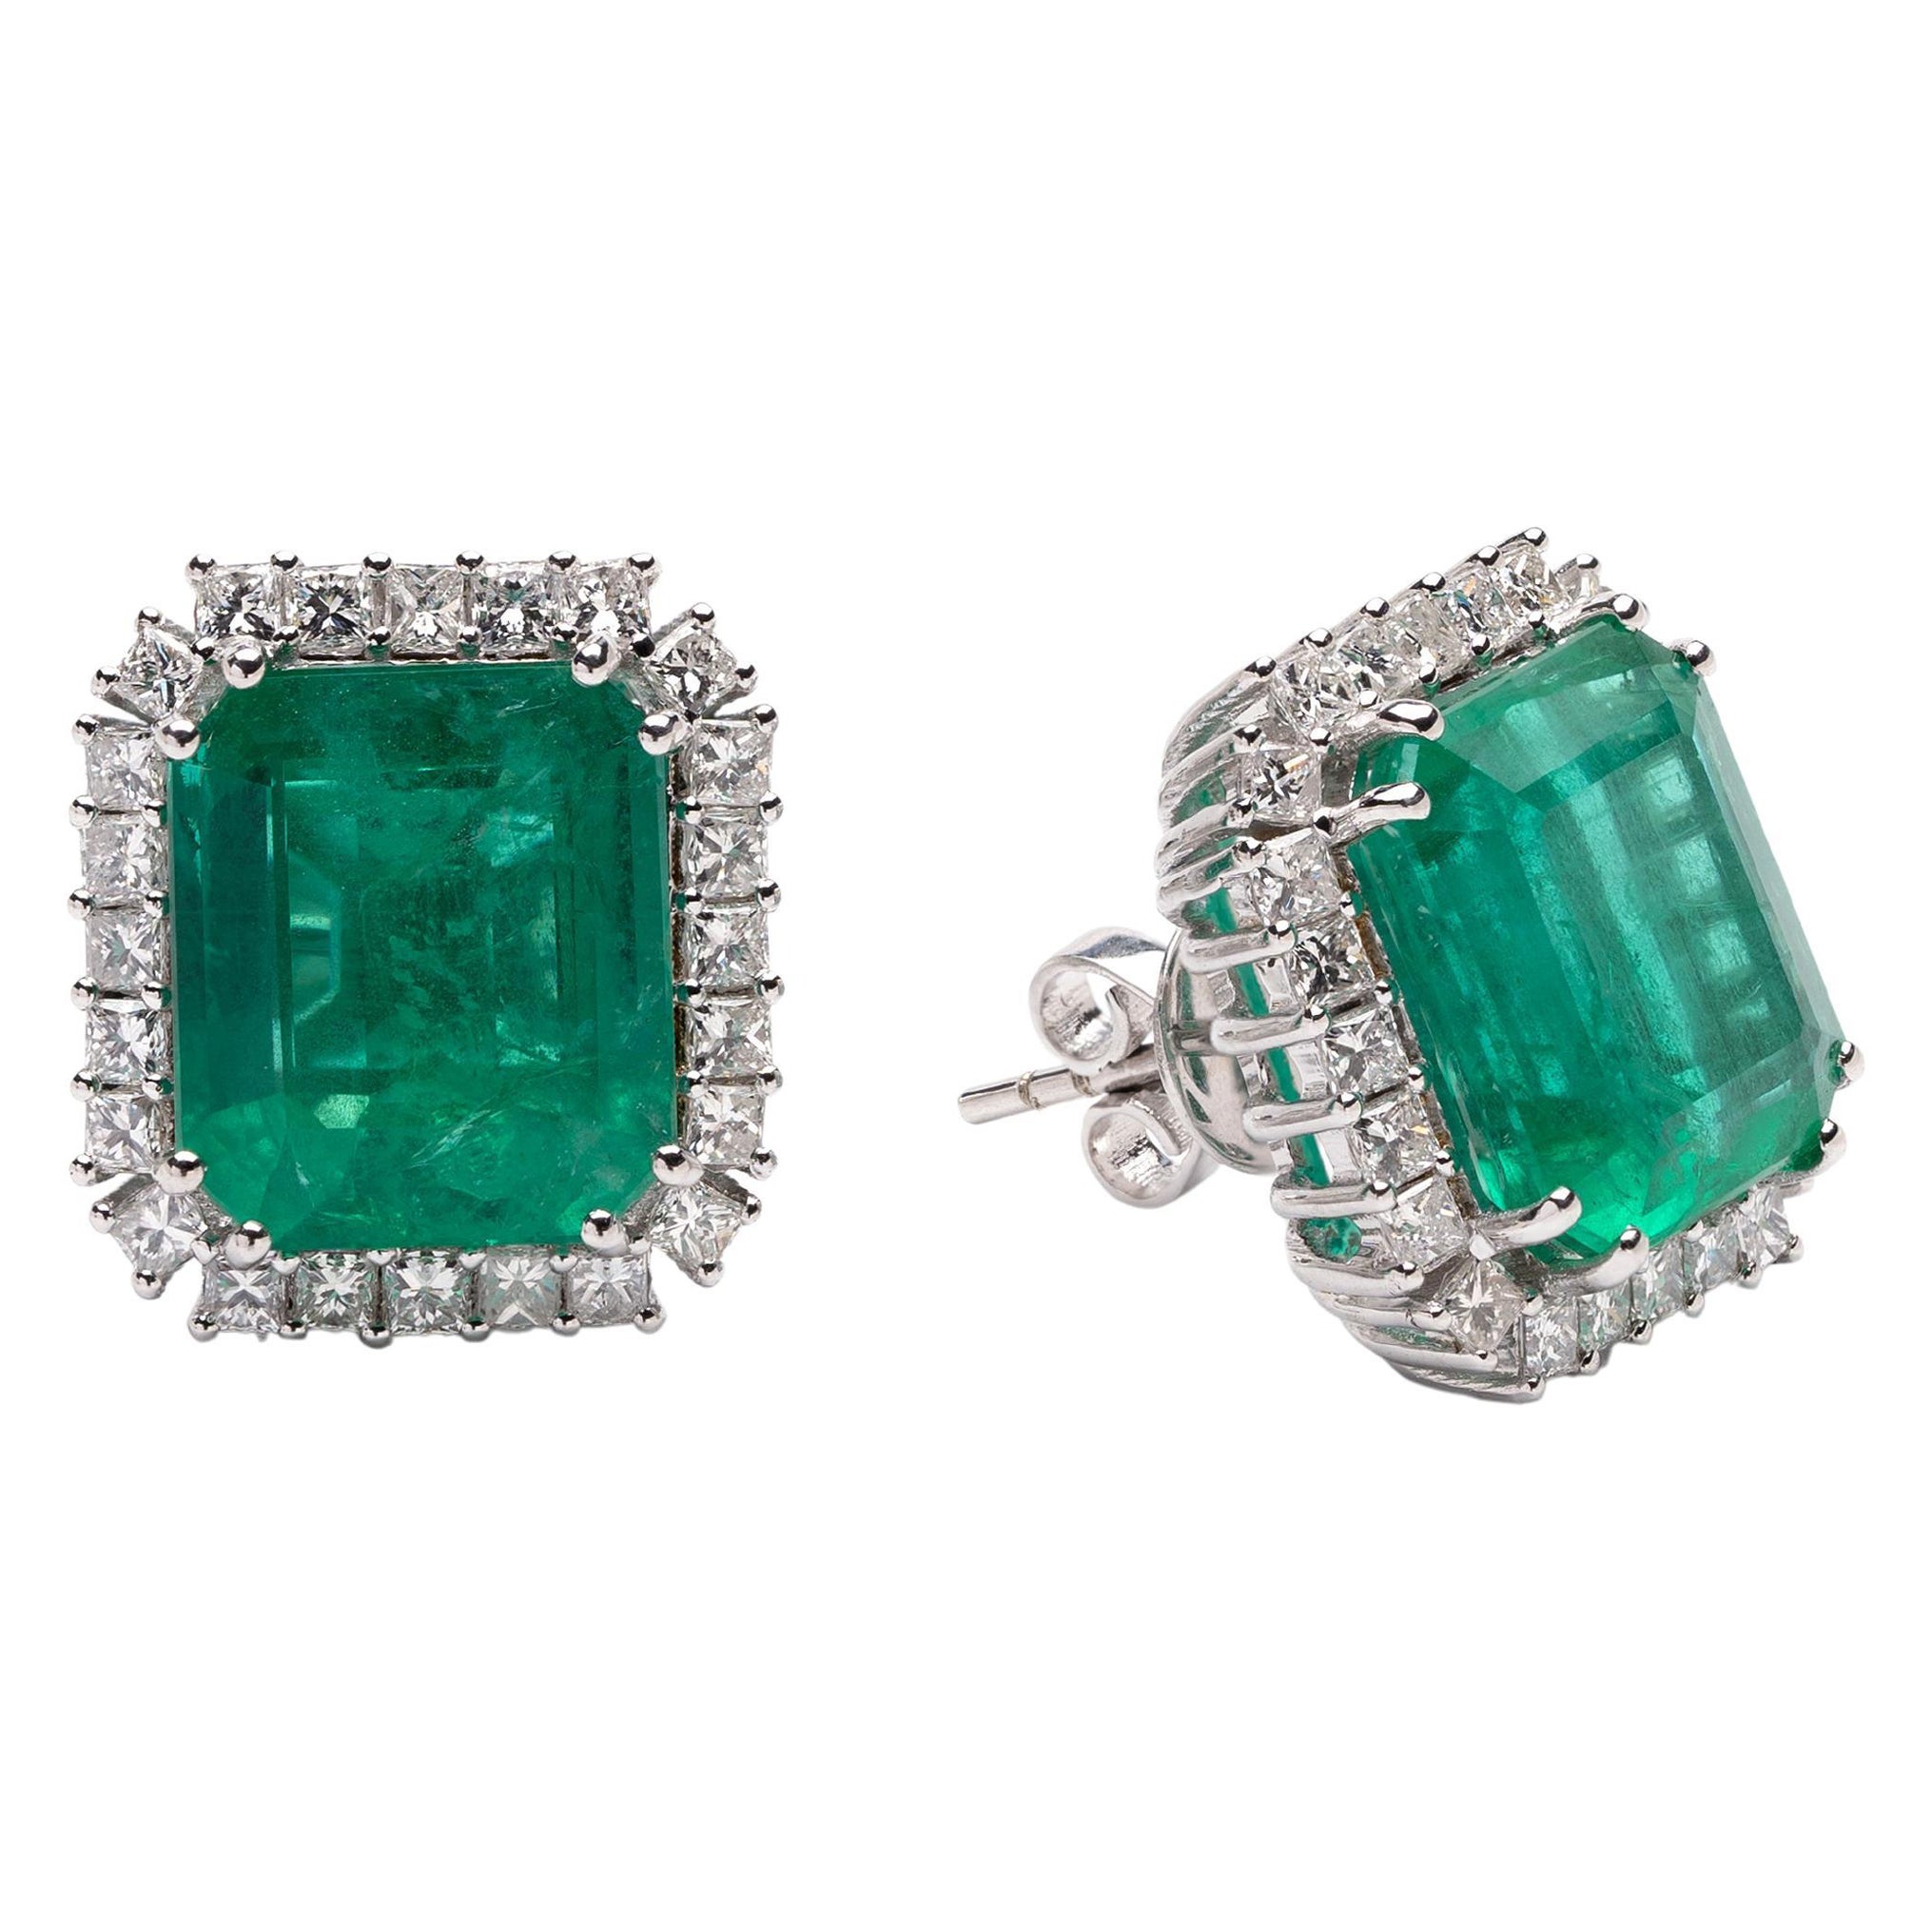 Natural Zambian Emerald Earrings with 11.06 Carats Emeralds in 14k Gold For Sale